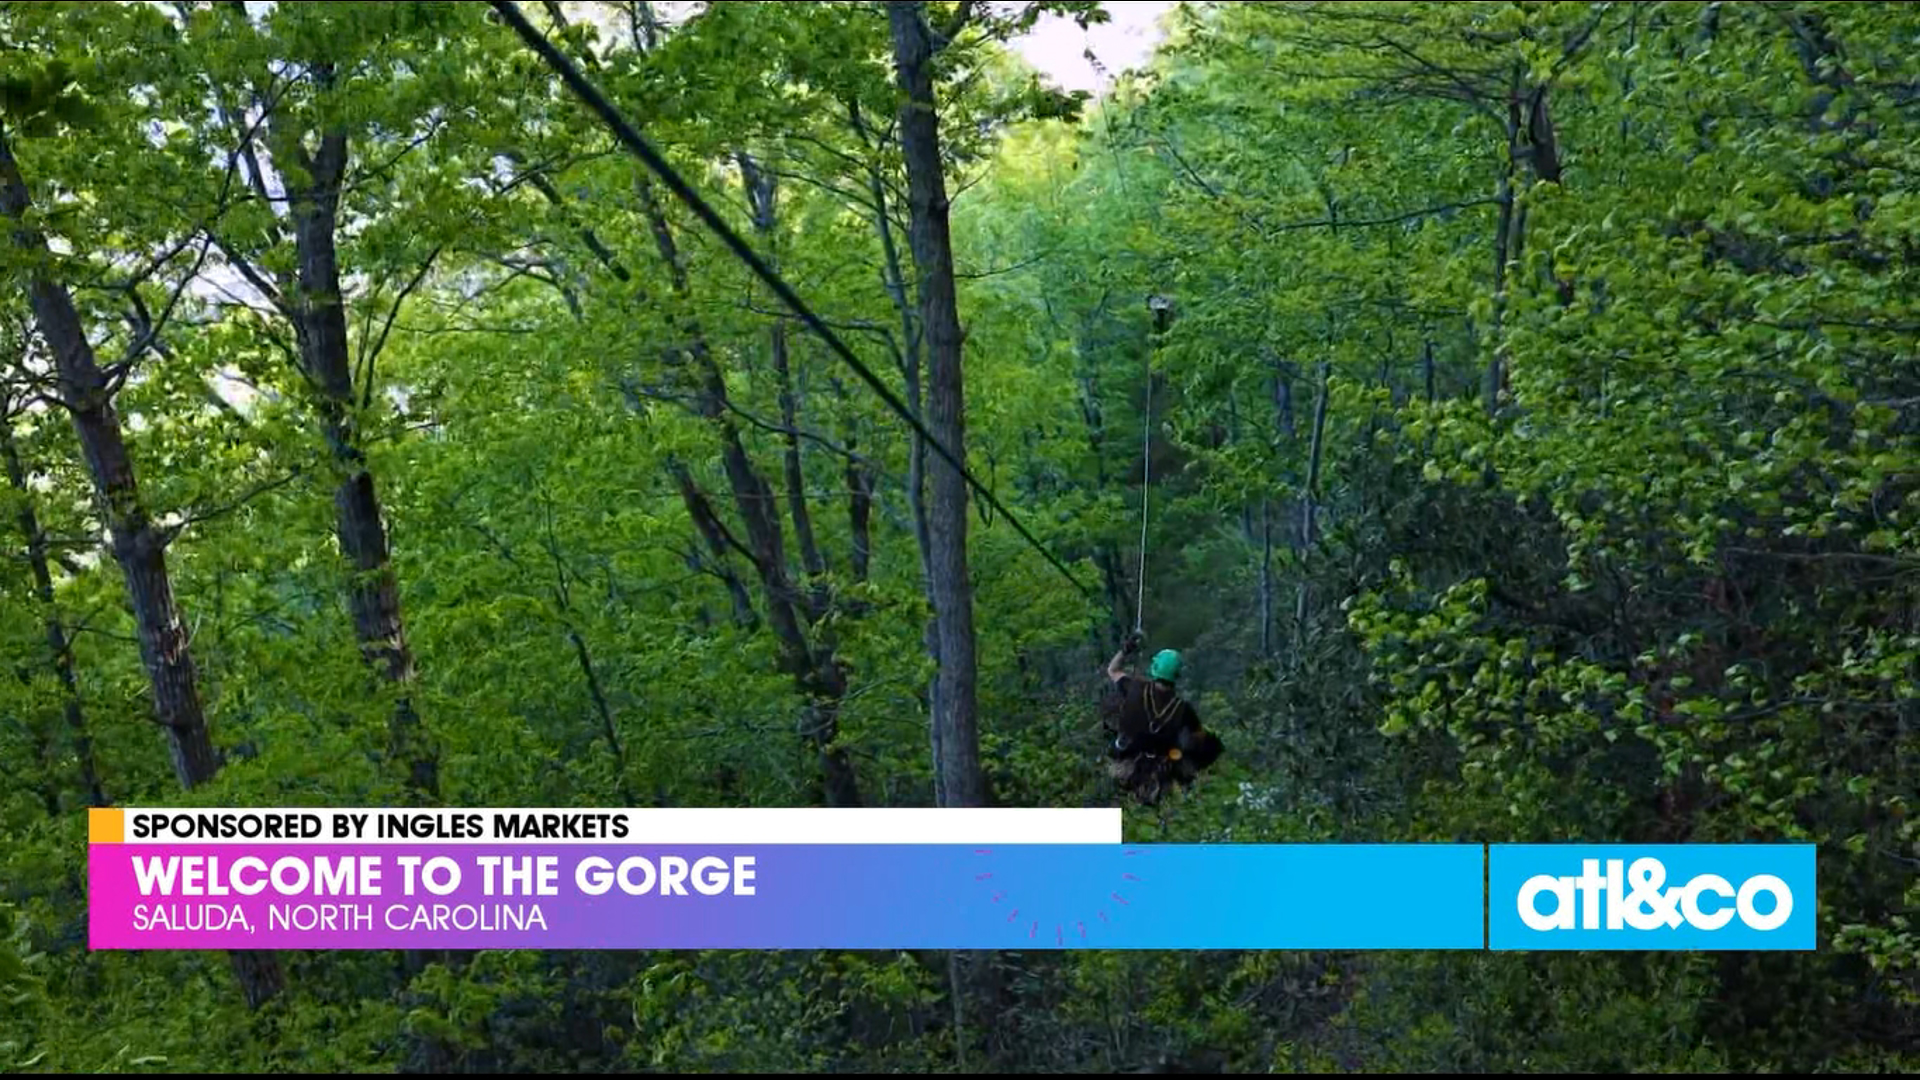 Enjoy a thrilling tree-based zipline canopy tour in Saluda, NC when you check out The Gorge with Ingles Markets.